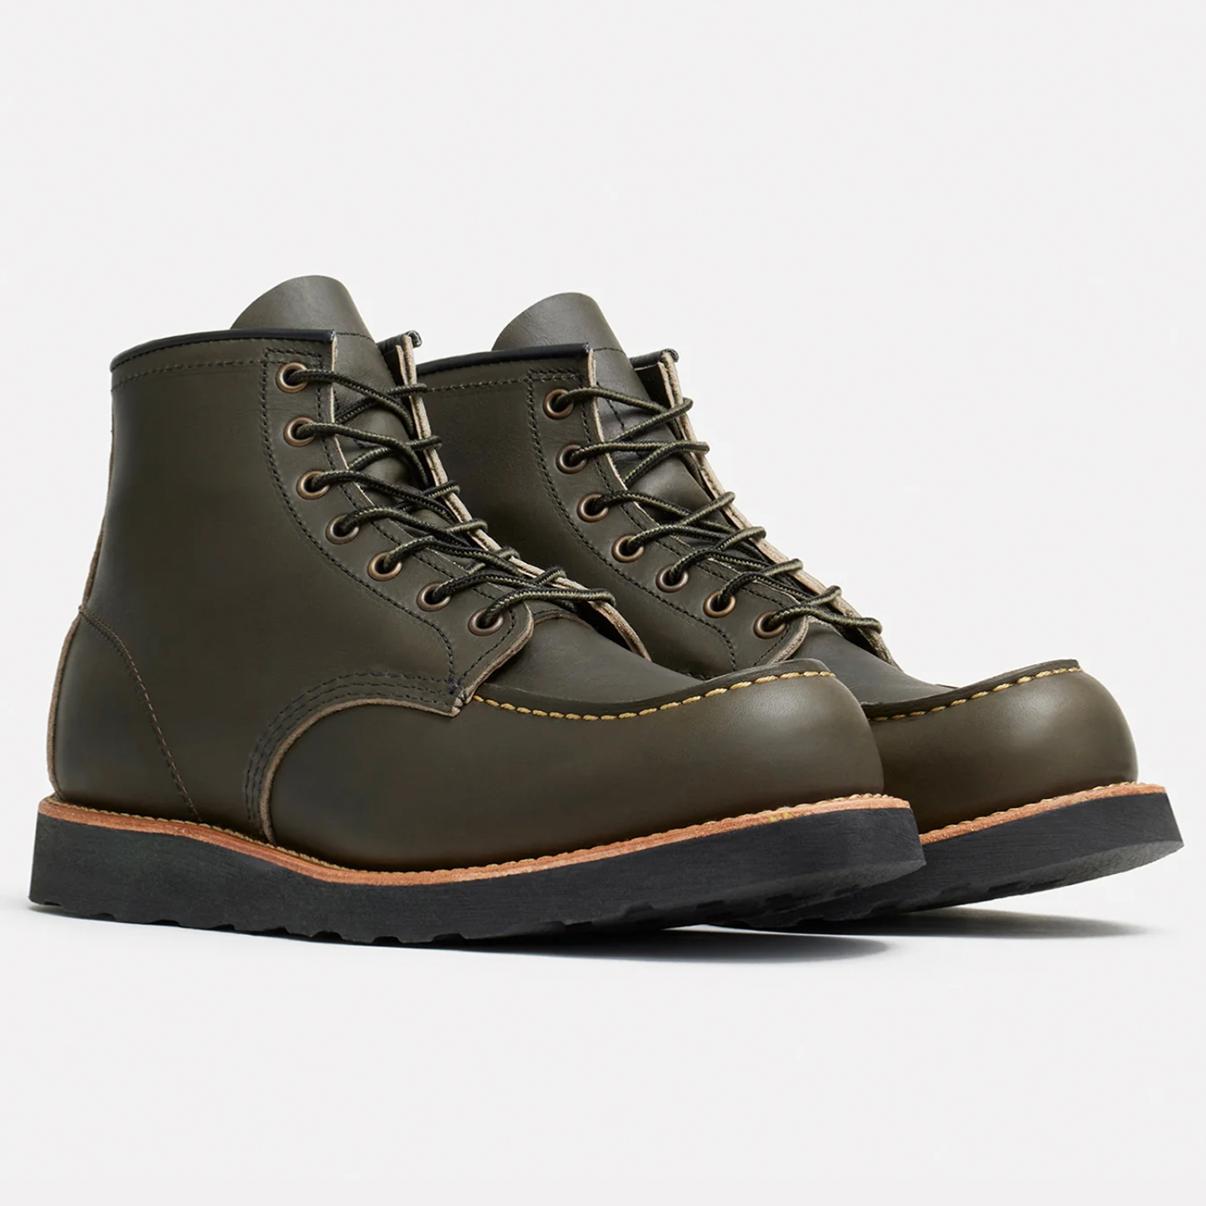 RED WING 8828